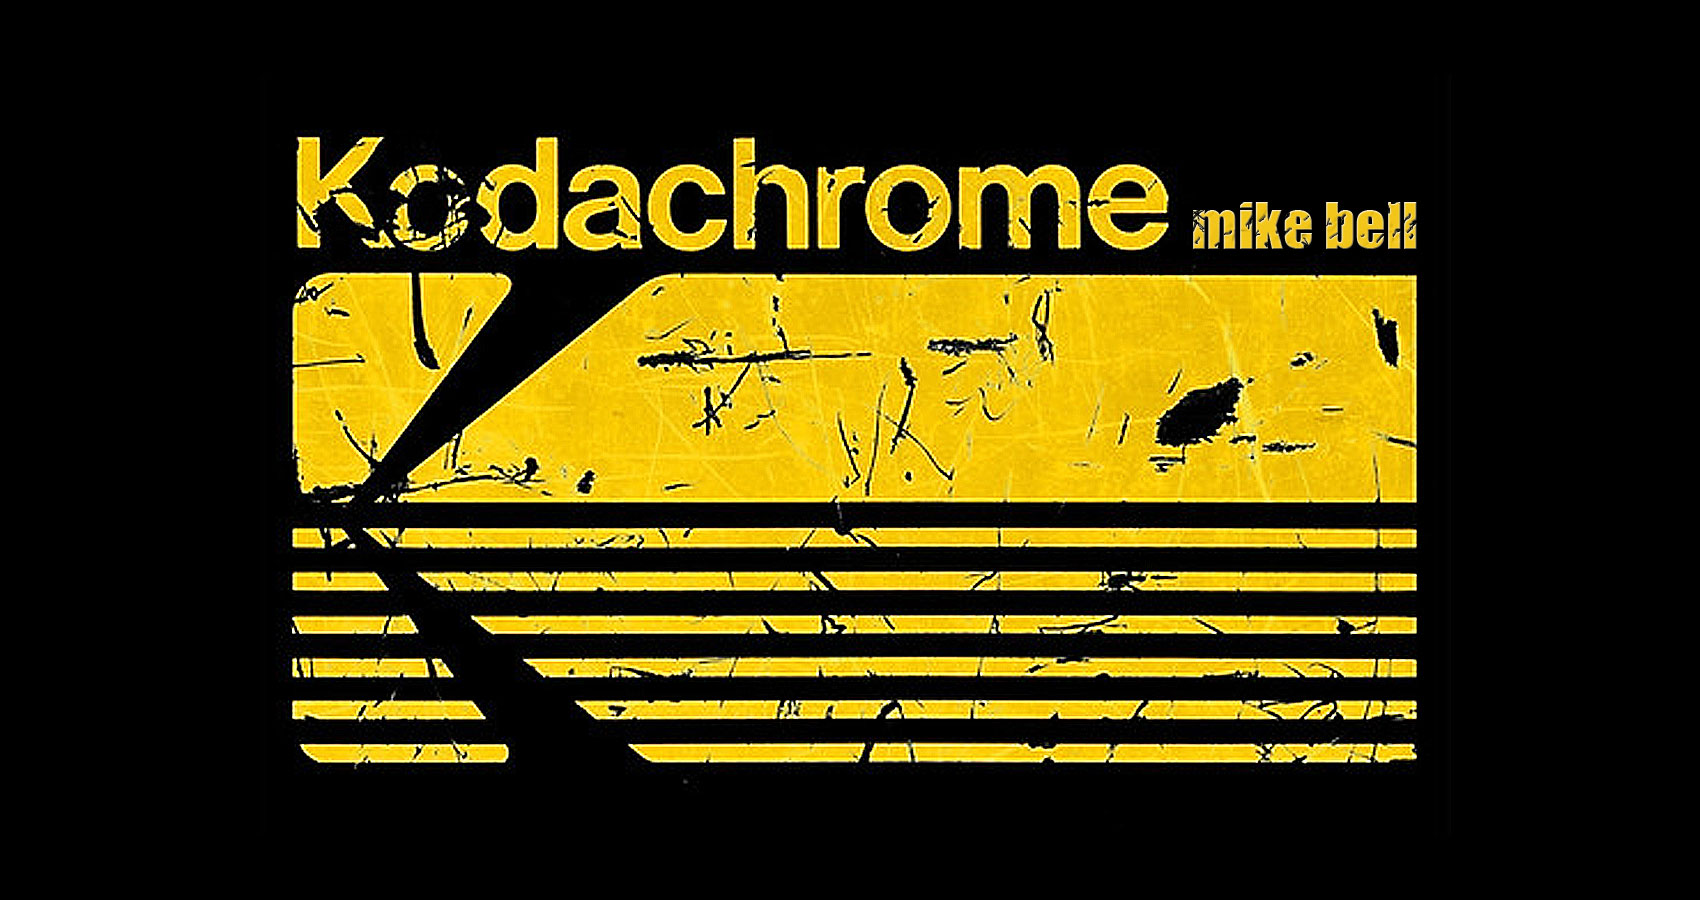 Kodachrome by Mike Bell at Spillwords.com